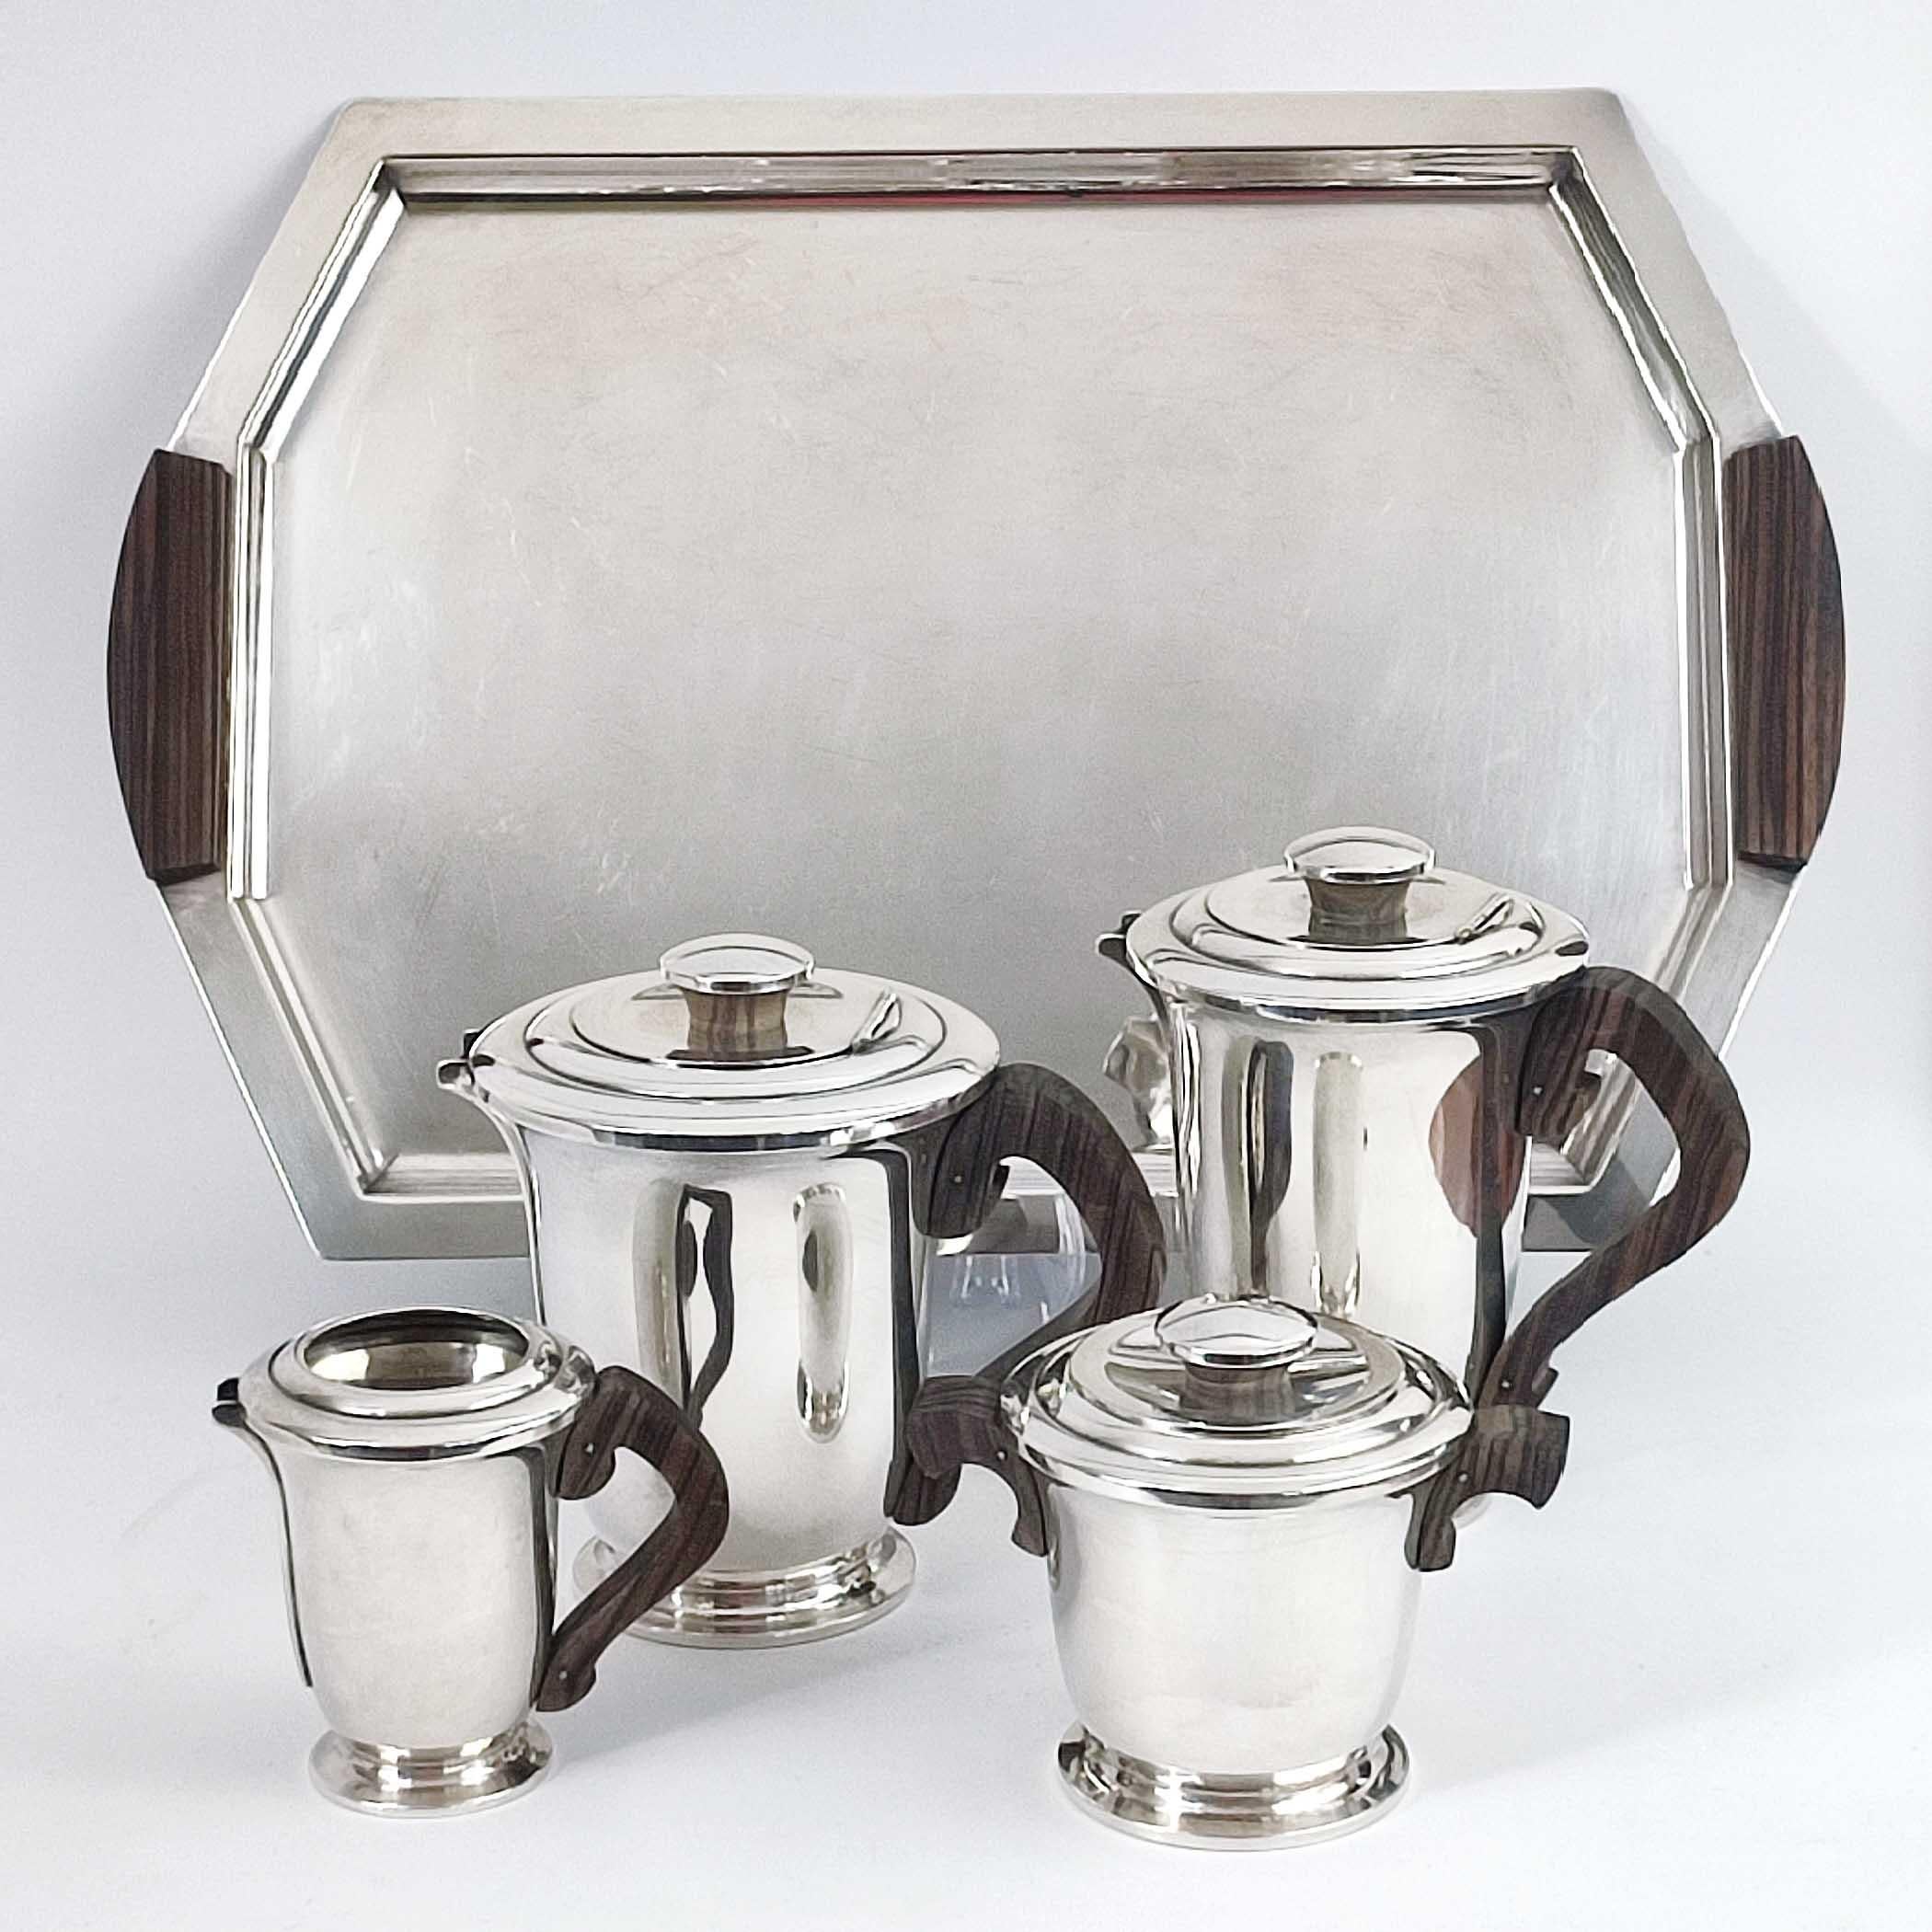 Ravinet d'Enfert, France, circa 1930.
Art Deco French Silver Plate and Ebony 5 piece Tea & Coffee set with matching tray. Includes a teapot with hinged cover, a coffee pot with hinged cover, a cream jug, a sugar bowl with cover and a matching